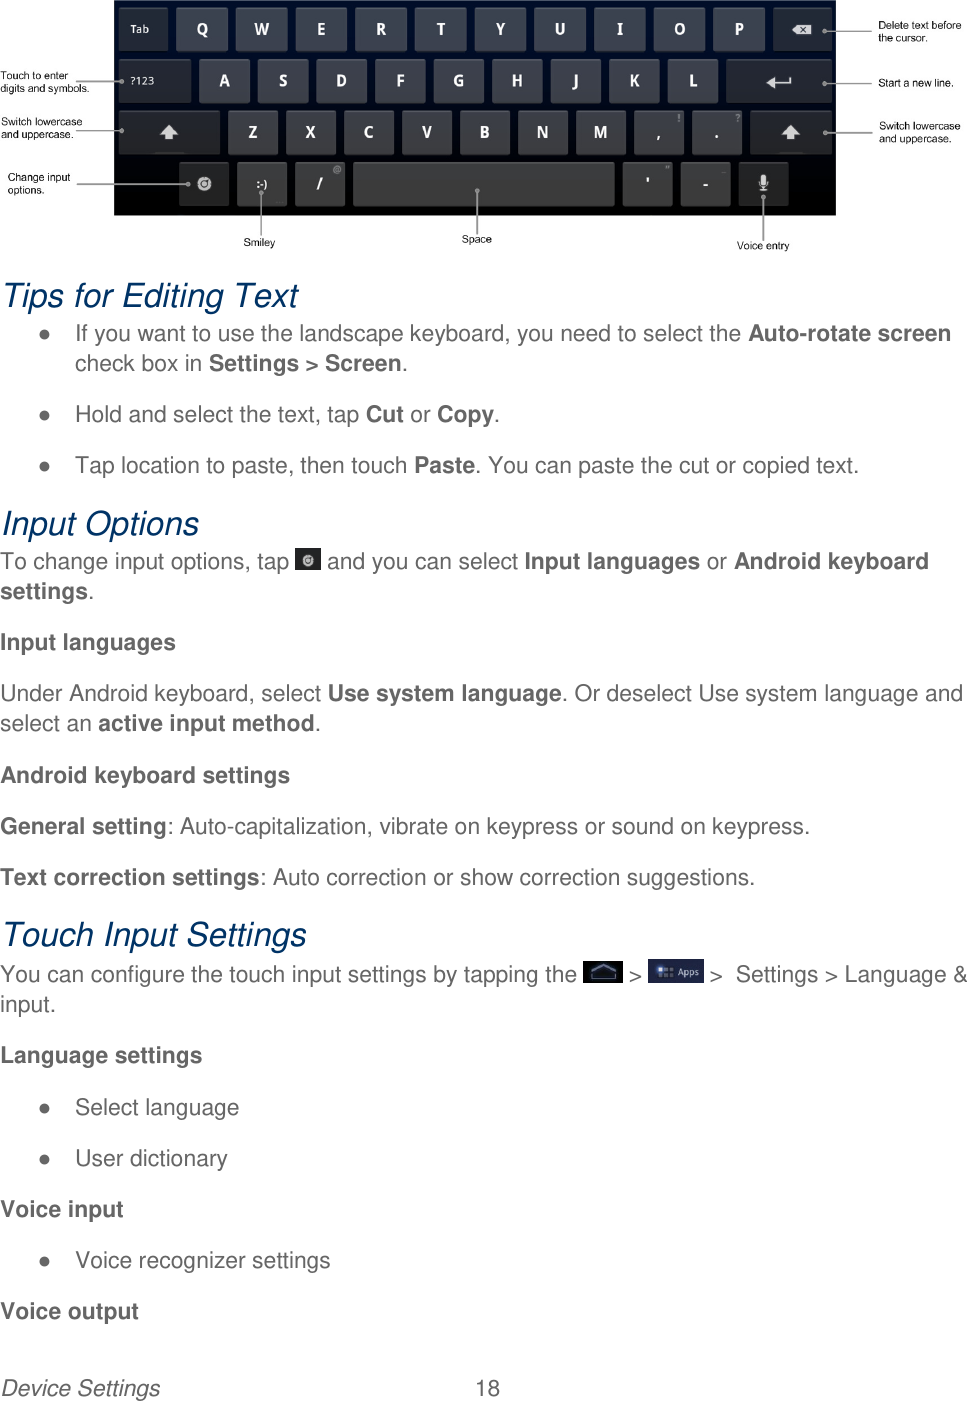 Device Settings  18    Tips for Editing Text ●  If you want to use the landscape keyboard, you need to select the Auto-rotate screen check box in Settings &gt; Screen. ●  Hold and select the text, tap Cut or Copy. ●  Tap location to paste, then touch Paste. You can paste the cut or copied text.  Input Options To change input options, tap   and you can select Input languages or Android keyboard settings. Input languages  Under Android keyboard, select Use system language. Or deselect Use system language and select an active input method. Android keyboard settings General setting: Auto-capitalization, vibrate on keypress or sound on keypress. Text correction settings: Auto correction or show correction suggestions. Touch Input Settings You can configure the touch input settings by tapping the   &gt;   &gt;  Settings &gt; Language &amp; input. Language settings ●  Select language ●  User dictionary  Voice input ●  Voice recognizer settings Voice output 